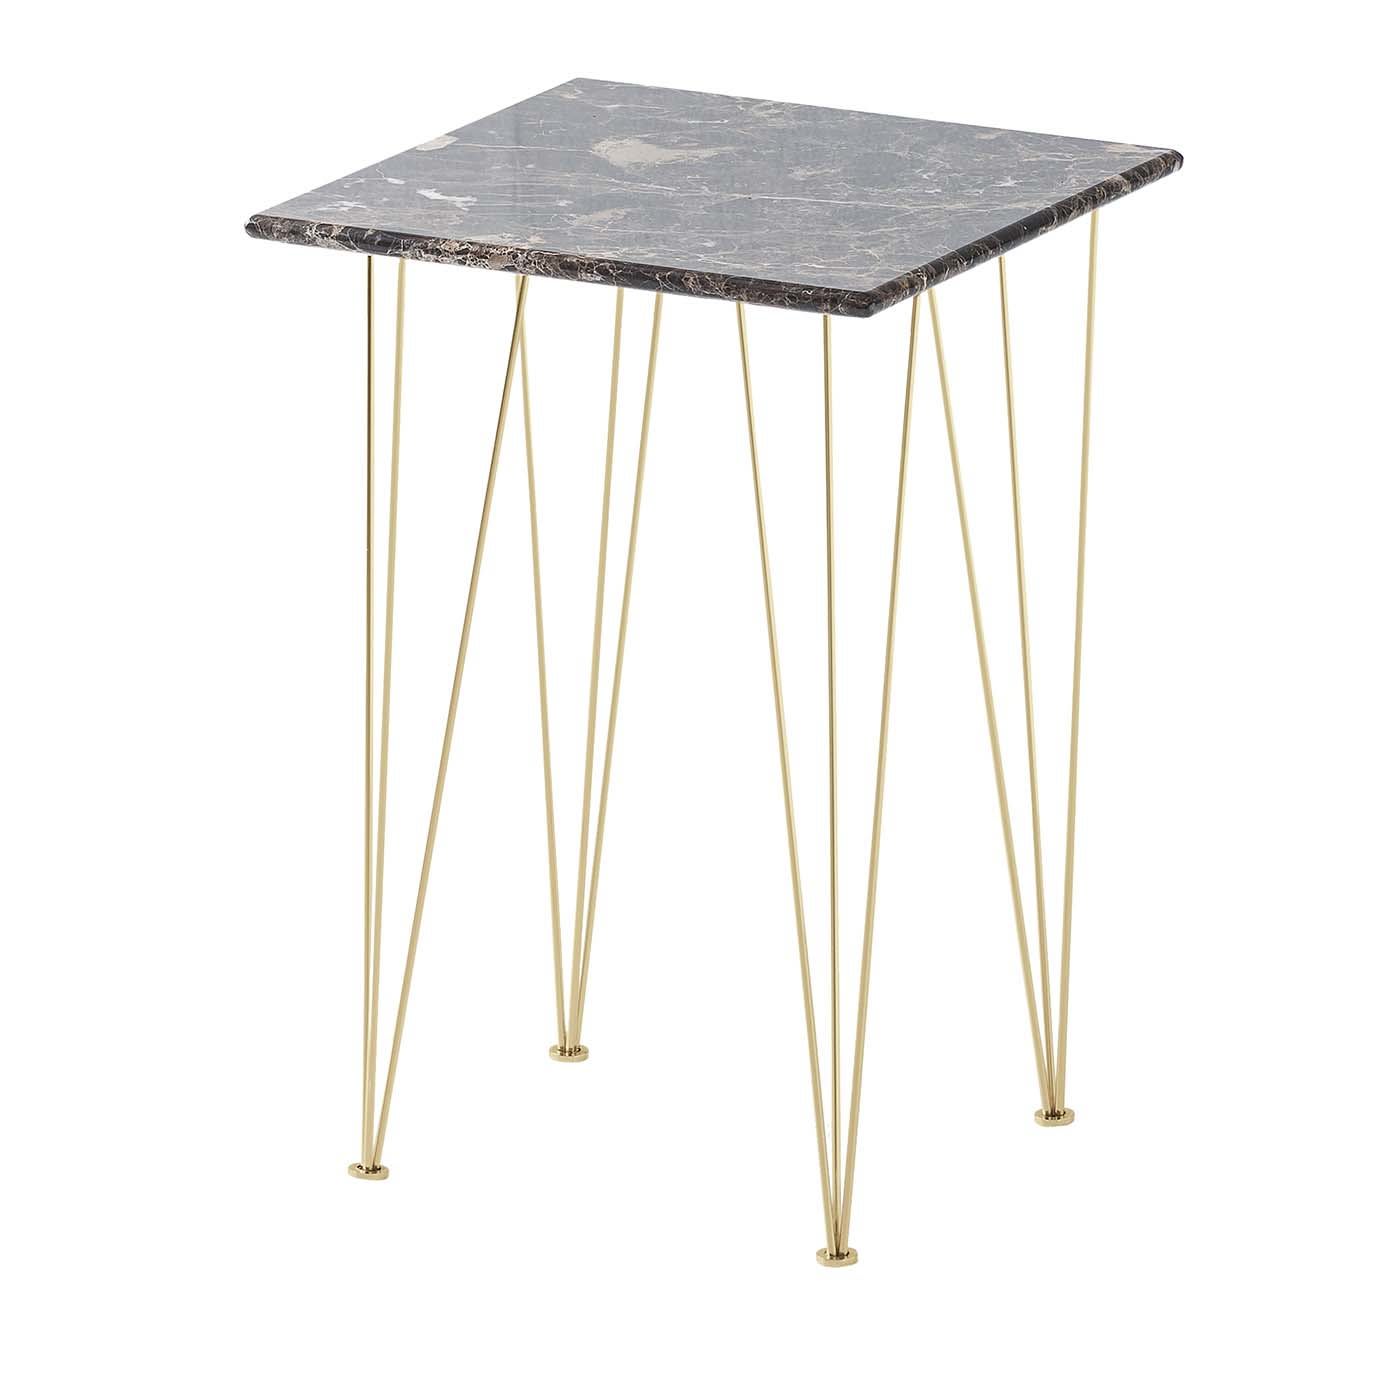 Flamingo Square Side Table with Gold Legs - Gam Home